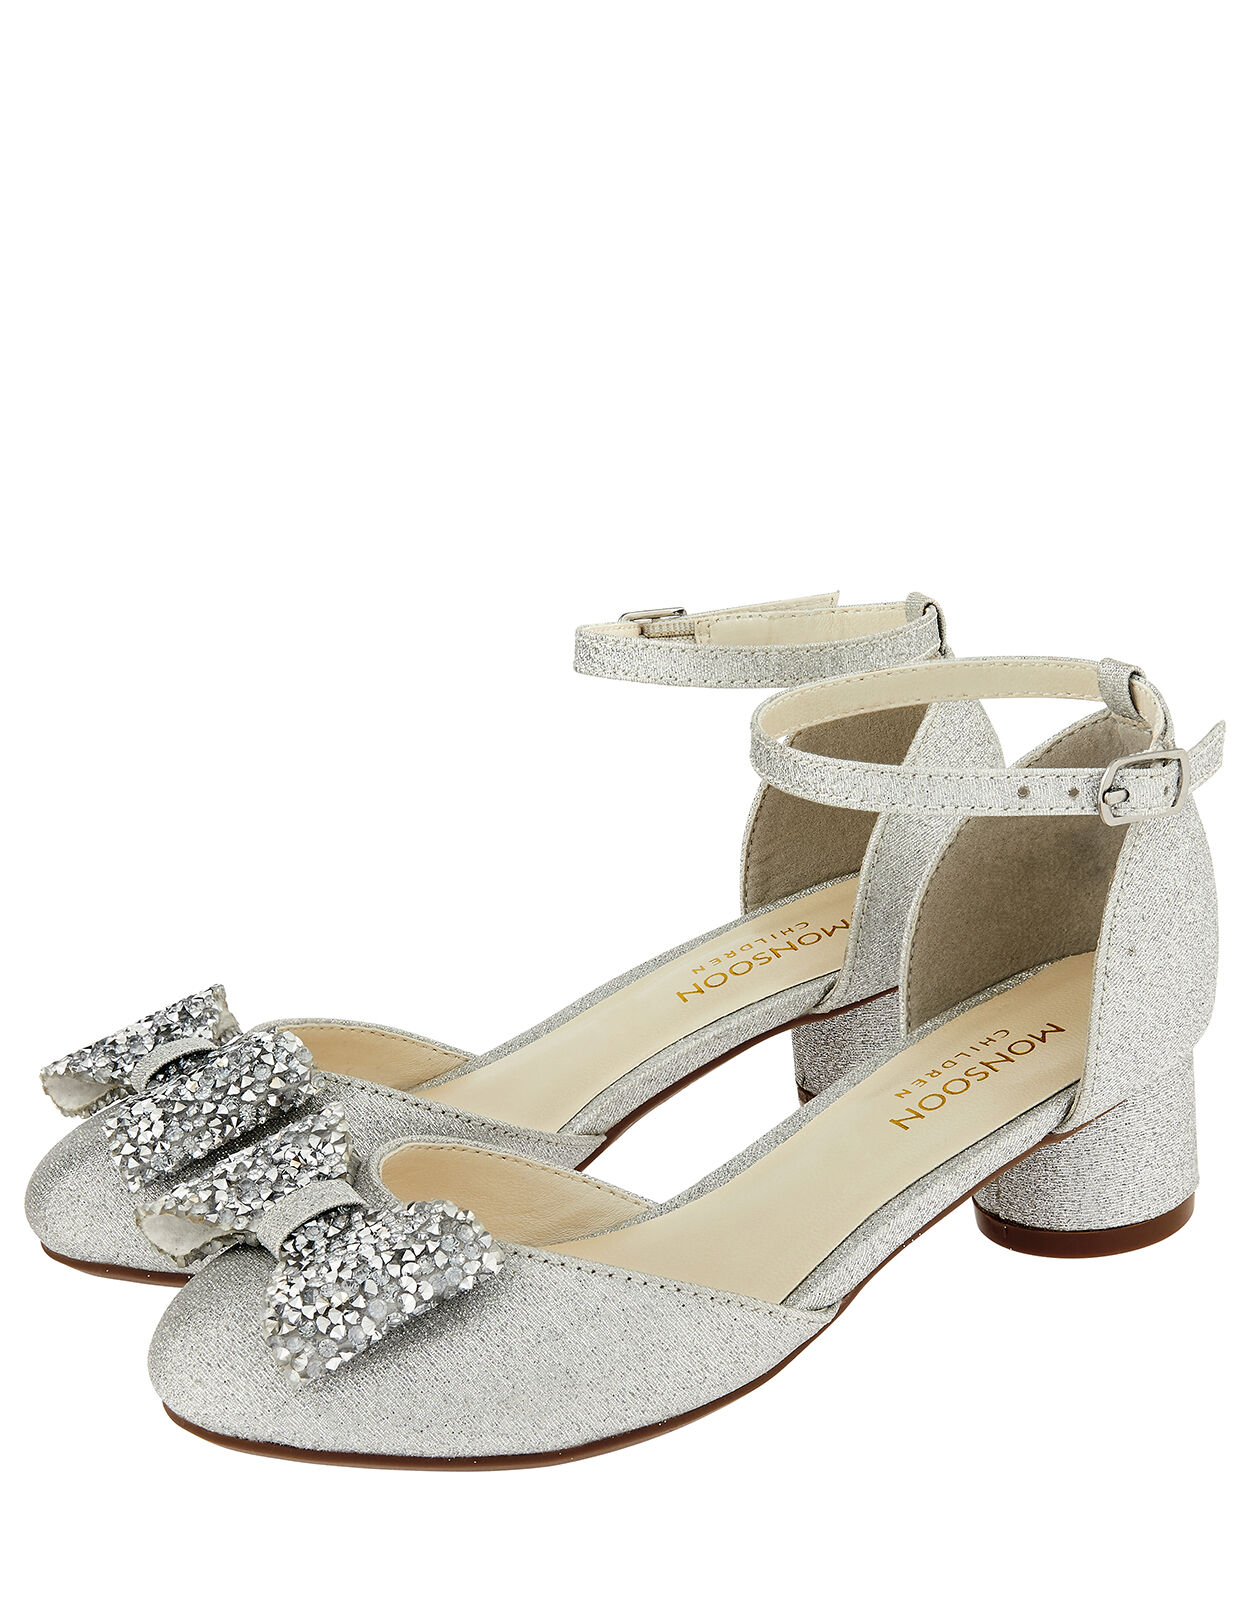 Piper Dazzle Bow Jazz Heel Shoes Silver 